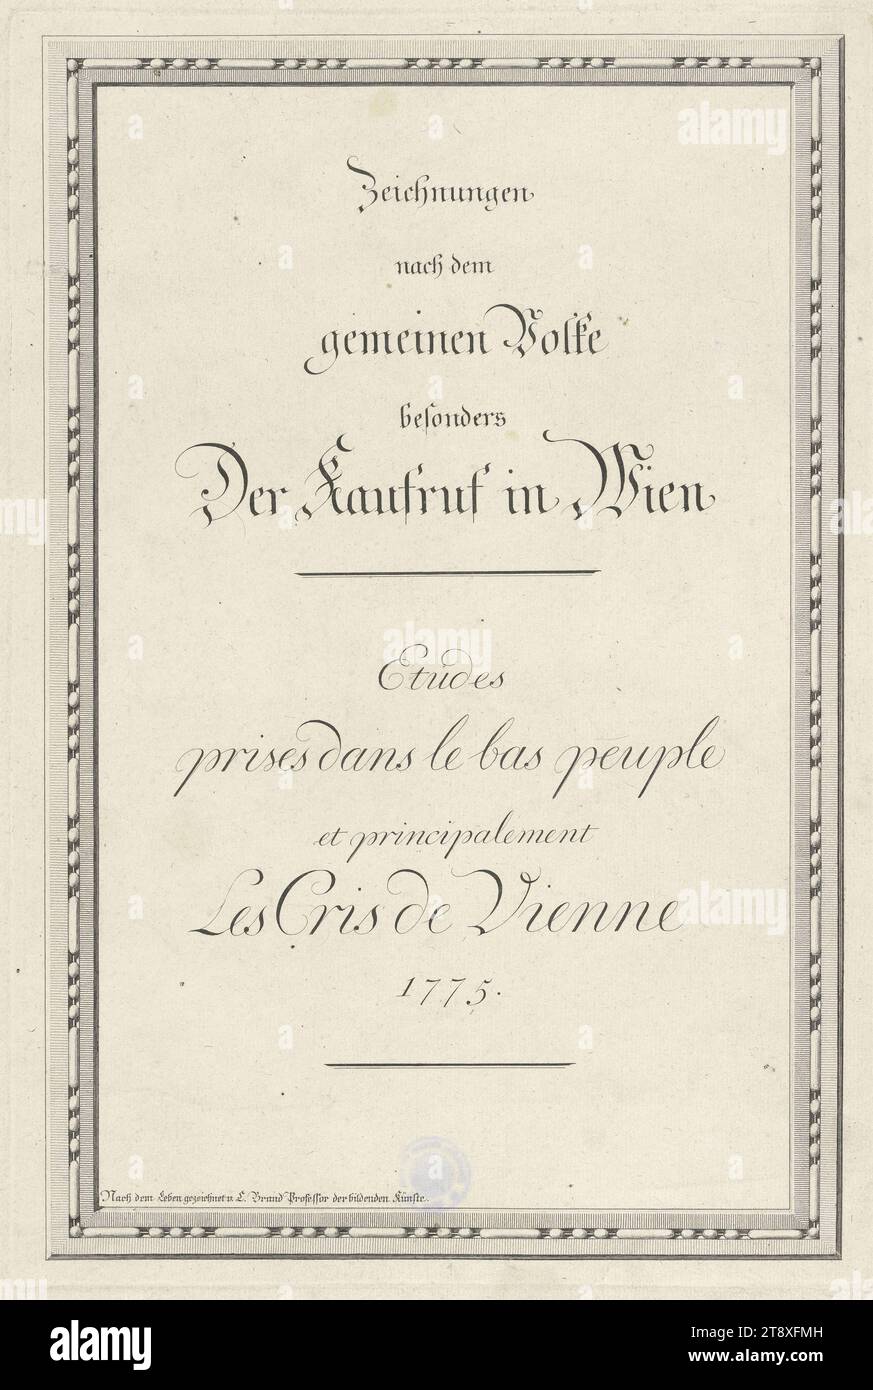 Drawings after the common people especially The call to buy in Vienna', 'Etudes prises dans le bas peuple et principalement. Les Cris de Vienne 1775.': Title page, Johann Christian Brand (1722-1795), Artist, 1775, paper, copperplate engraving, sheet size 44.3×31.4 cm, plate size 36×24.3 cm, Fine Arts, Stereotypes., The Vienna Collection Stock Photo